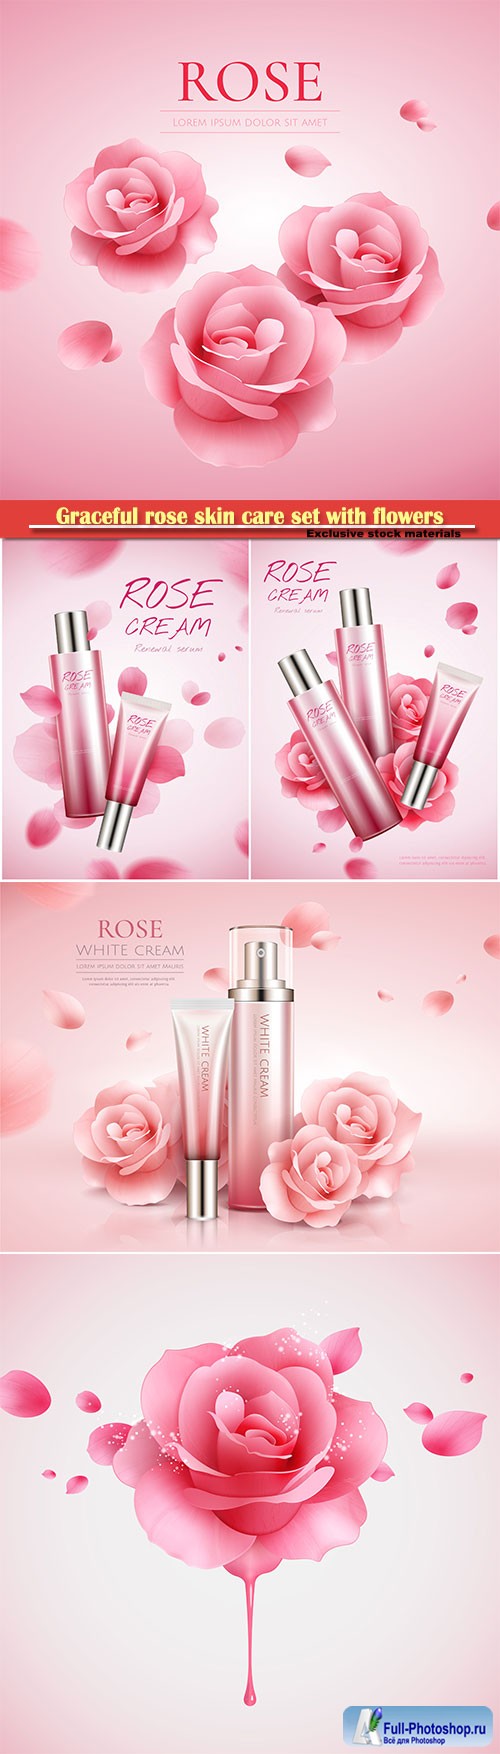 Graceful rose skin care set with flowers and flying petals in 3d illustration